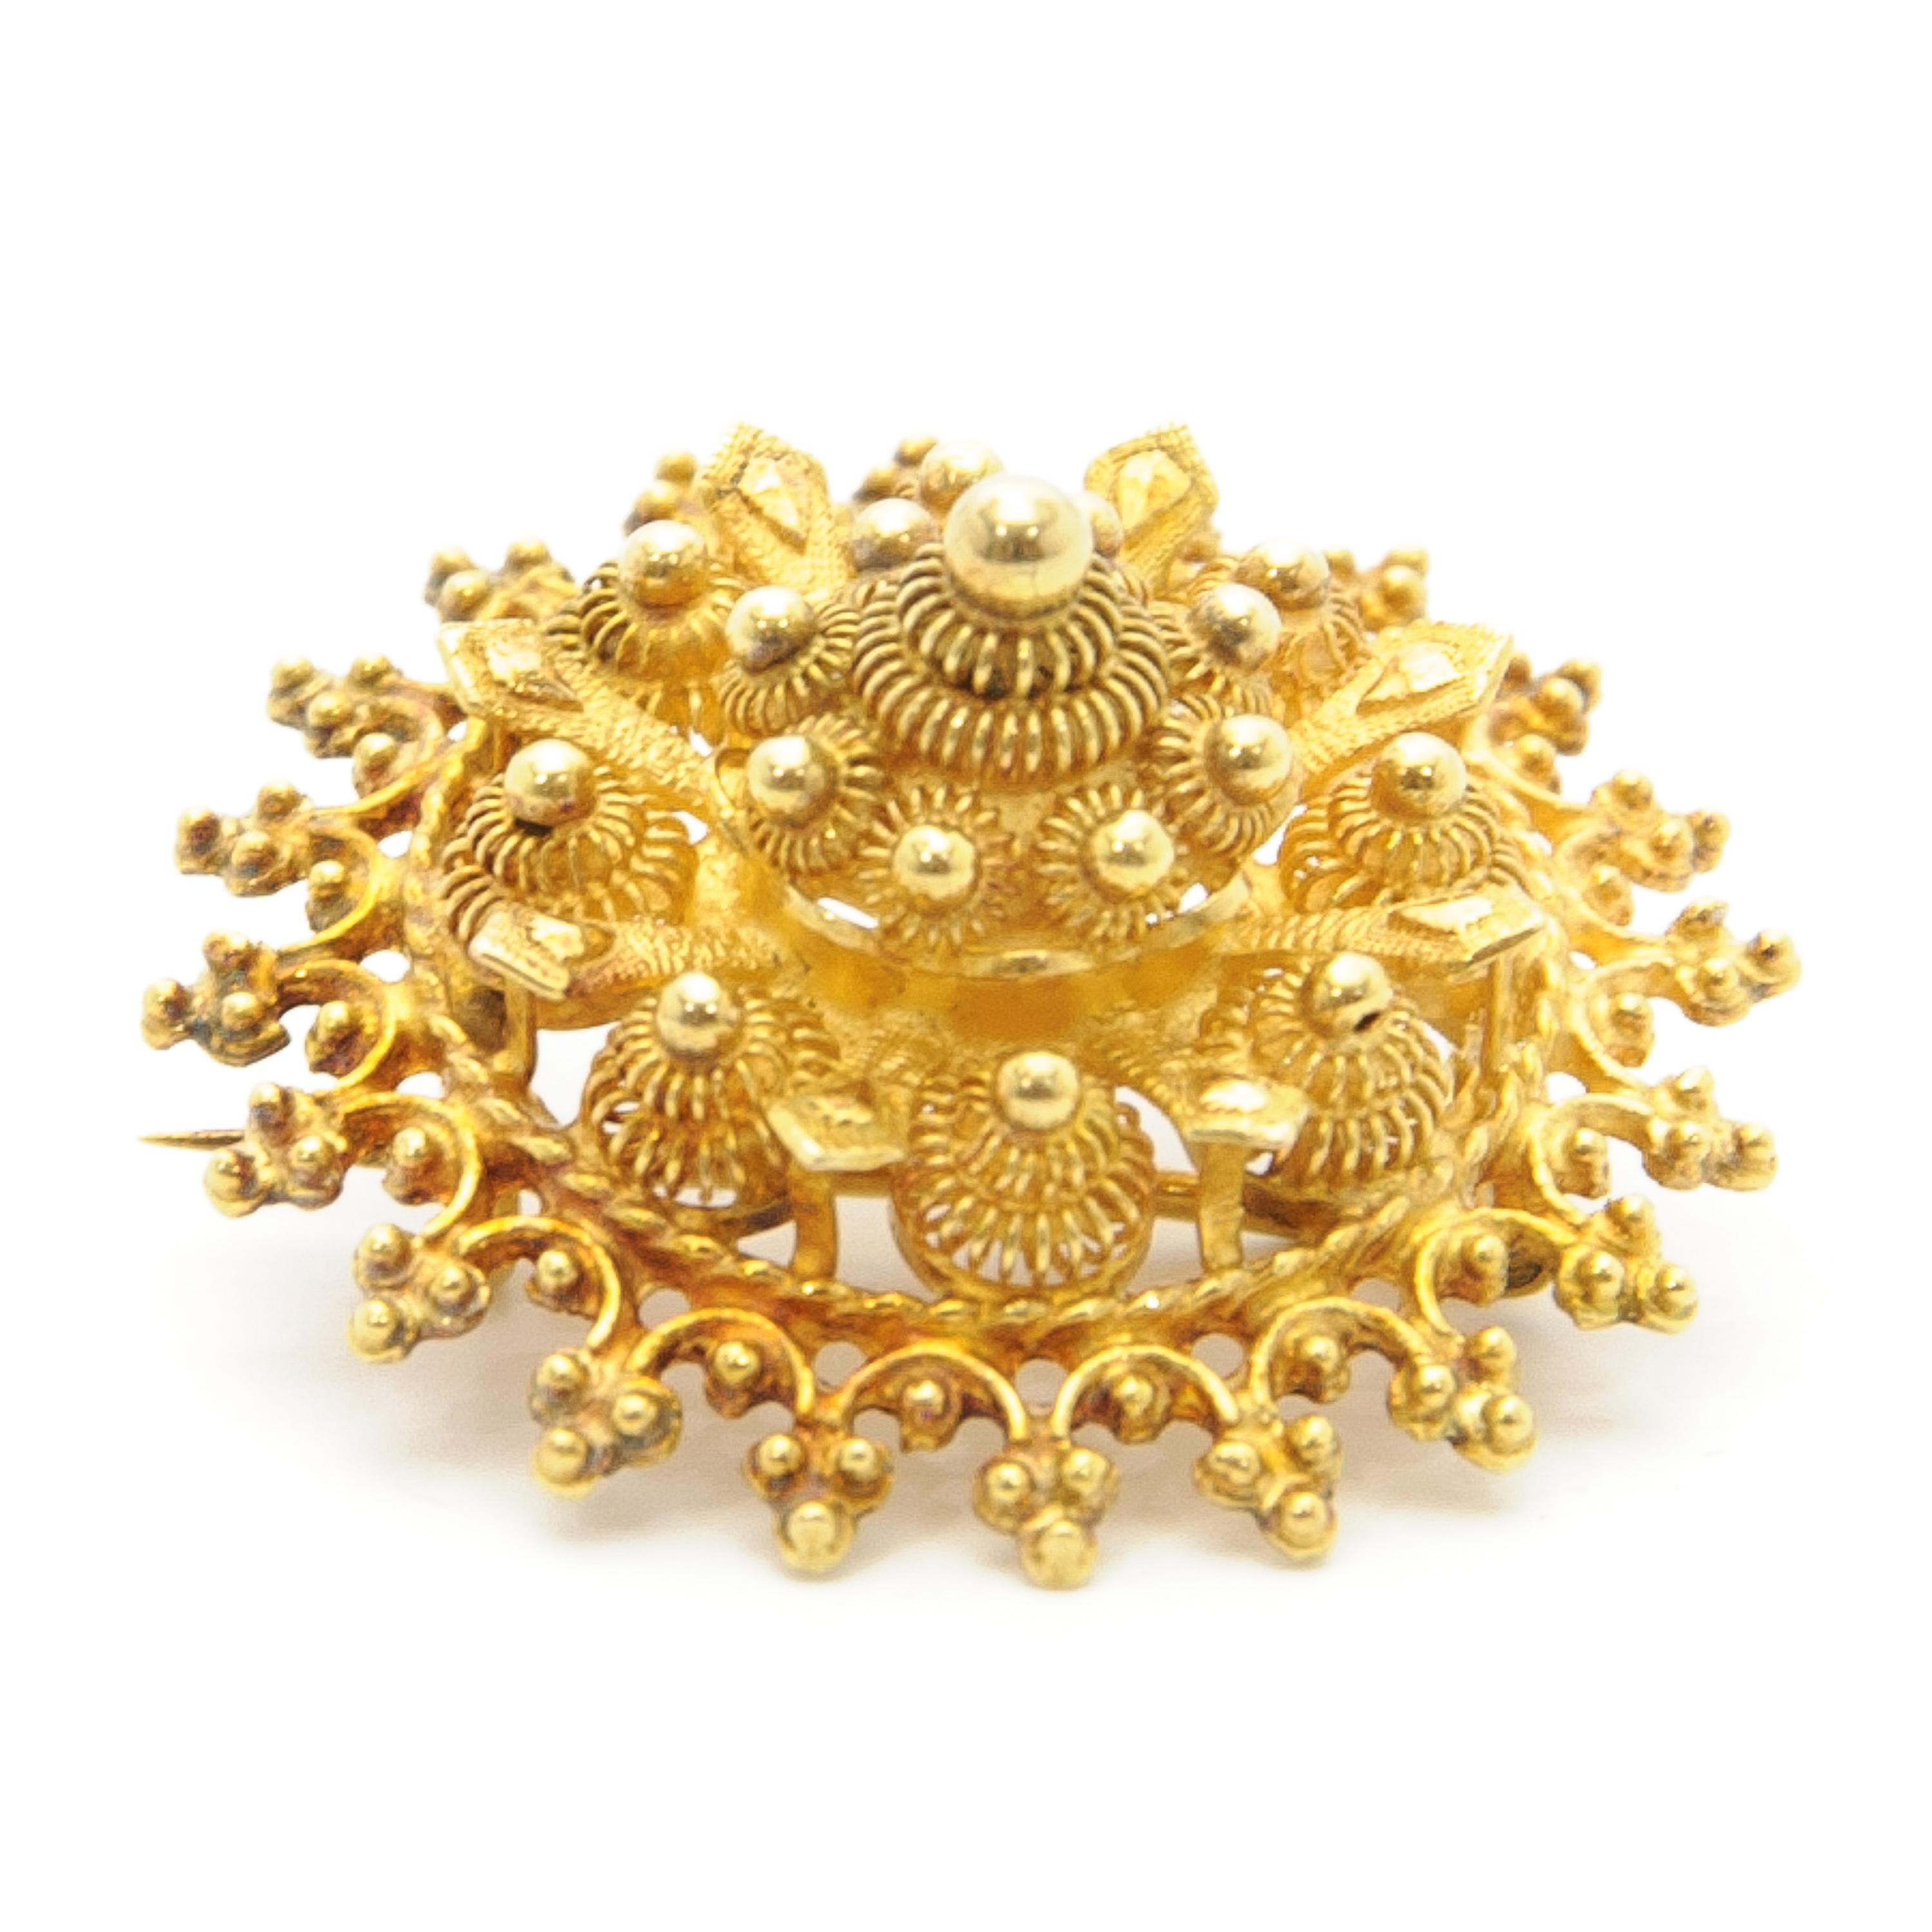 Etruscan Revival 14 karat yellow gold pin brooch made of cannetille and granulation work. The brooch is delicately handcrafted with fine gold wirework, small gold balls on top of the brooch. 

These kinds of jewels represent a varied and rich